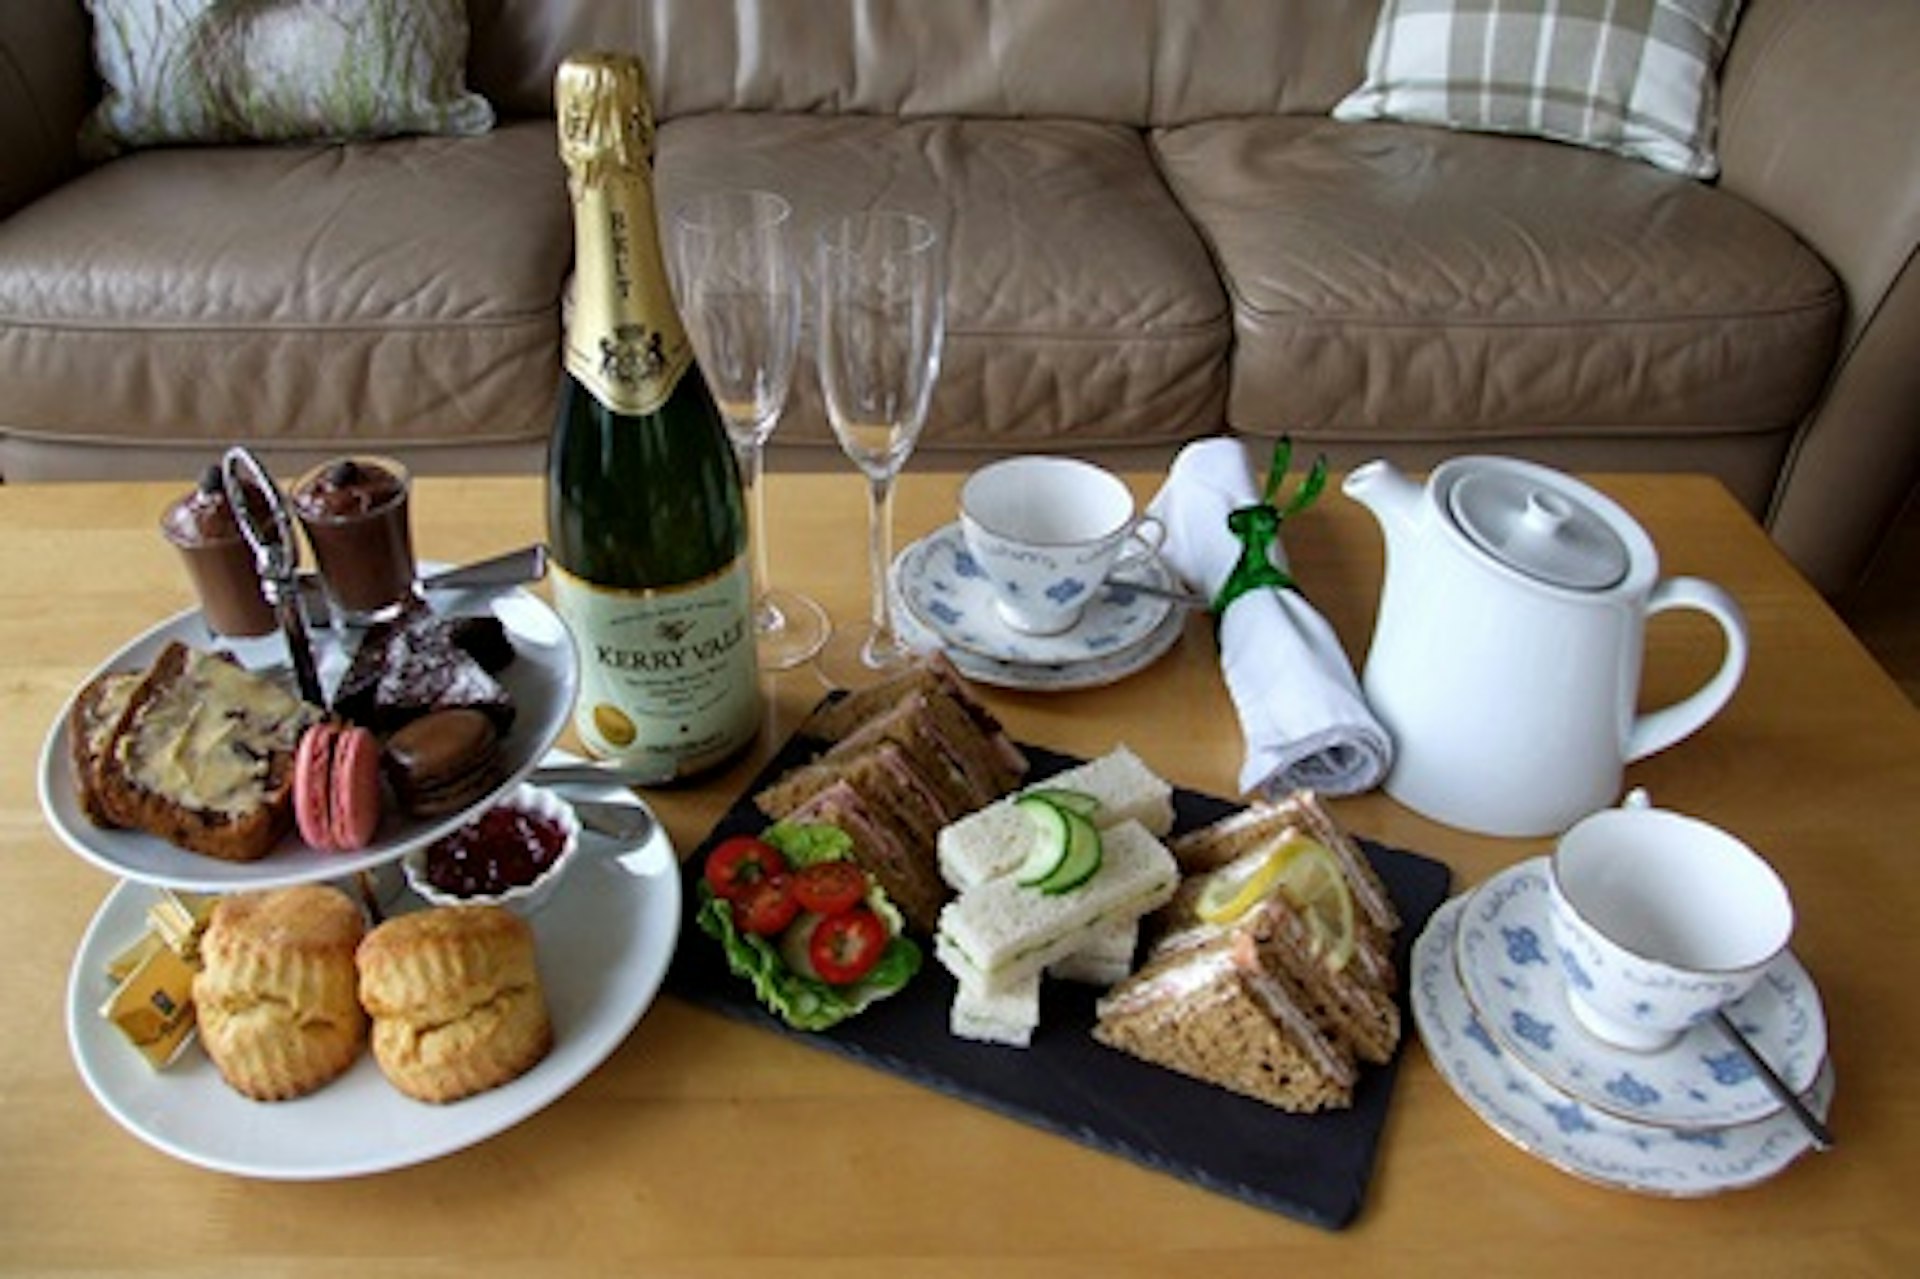 Vineyard Tour and Tasting with Sparkling Afternoon Tea for Two at Kerry Vale Vineyard